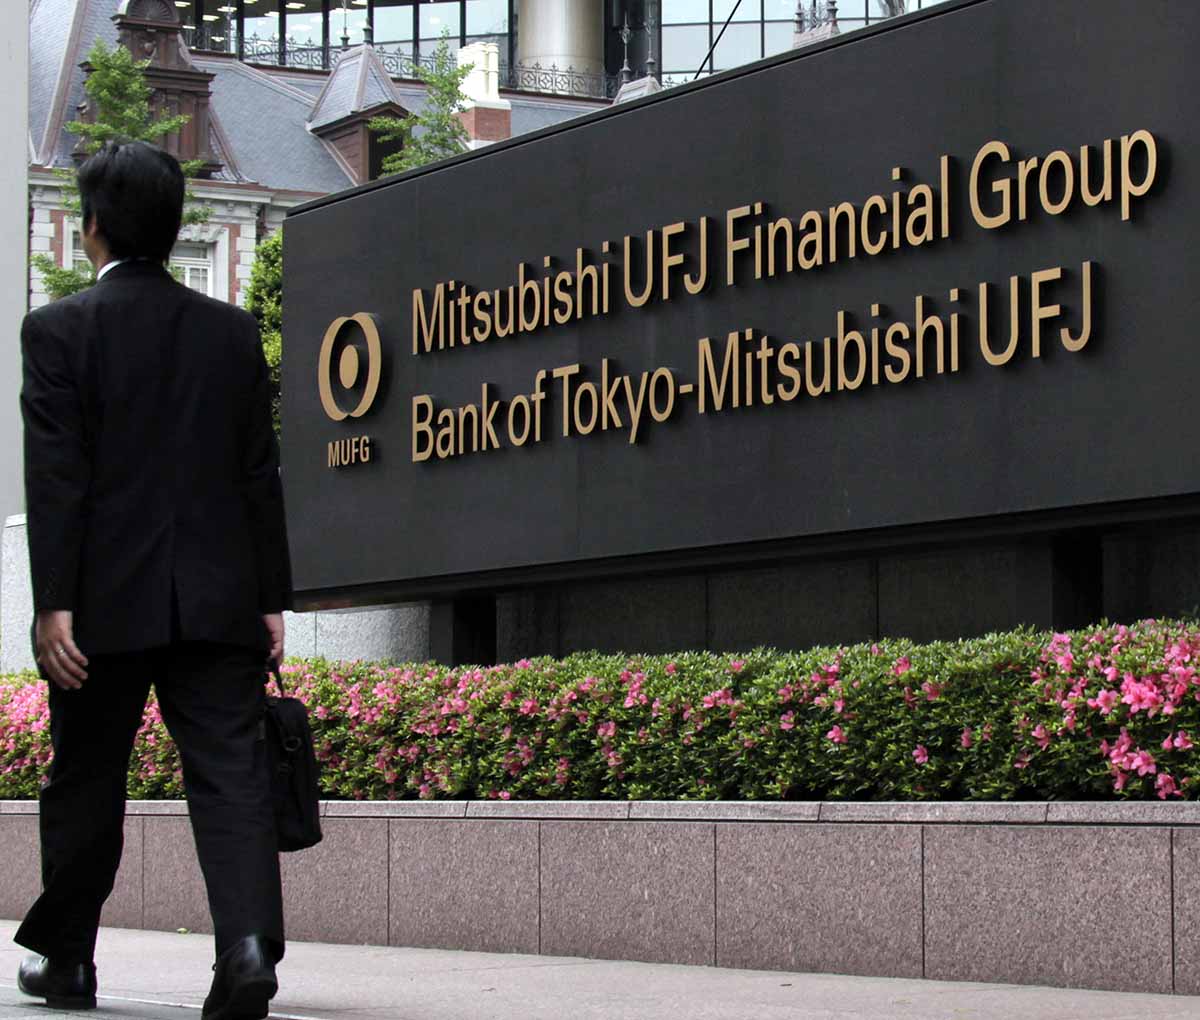 The Bank of Tokyo-Mitsubishi UFJ recently announced that it will implement a payment service to streamline transactions between the headquarters and its subsidiary in Brazil